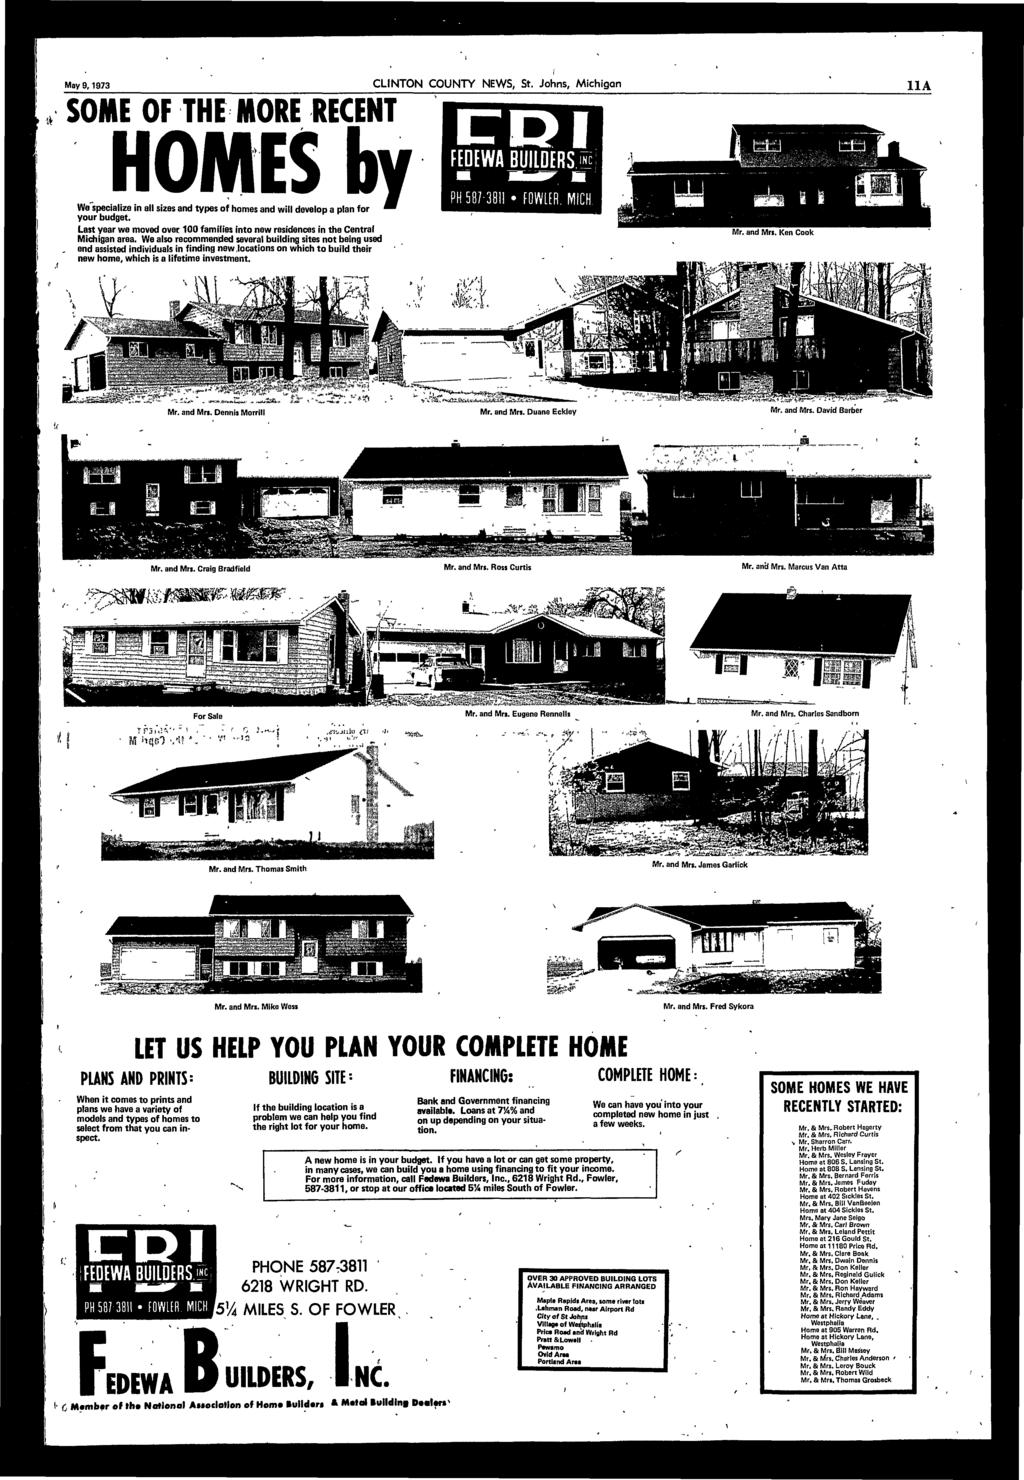 May 9,1973 CLNTON COUNTY NEWS, St. Johns, Mchgan 11A \k SOME OF THE MORE RECENT HOMES by We specalze n all szes and types of homes and wll develop a plan for your budget.